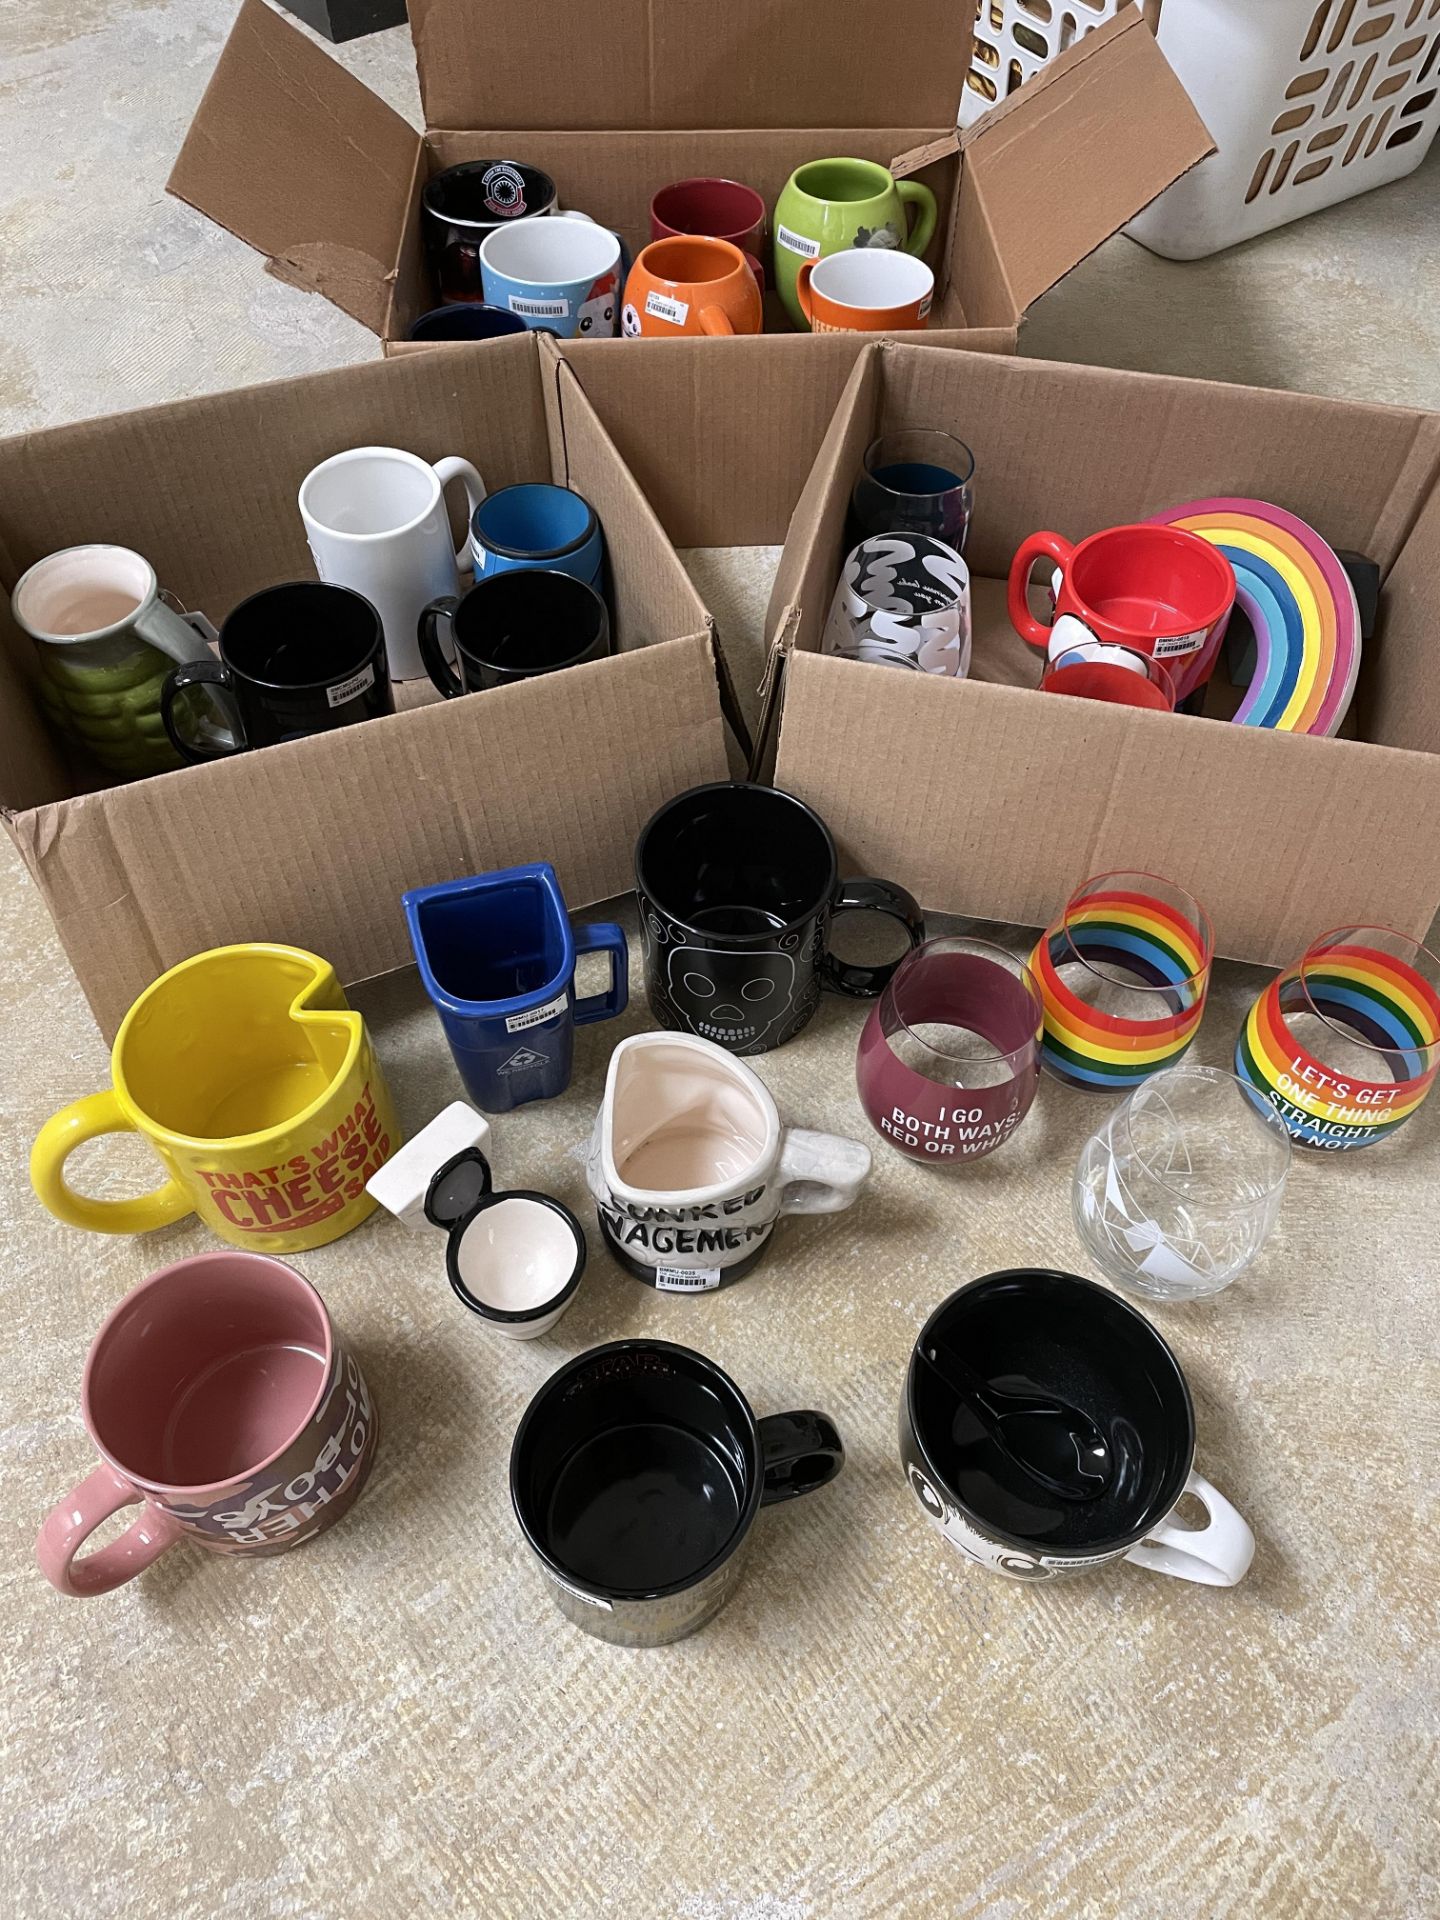 3 Boxes of 30+ Novelty Coffee Cups/Mugs, Star Wars, Comedy, Humor, Etc